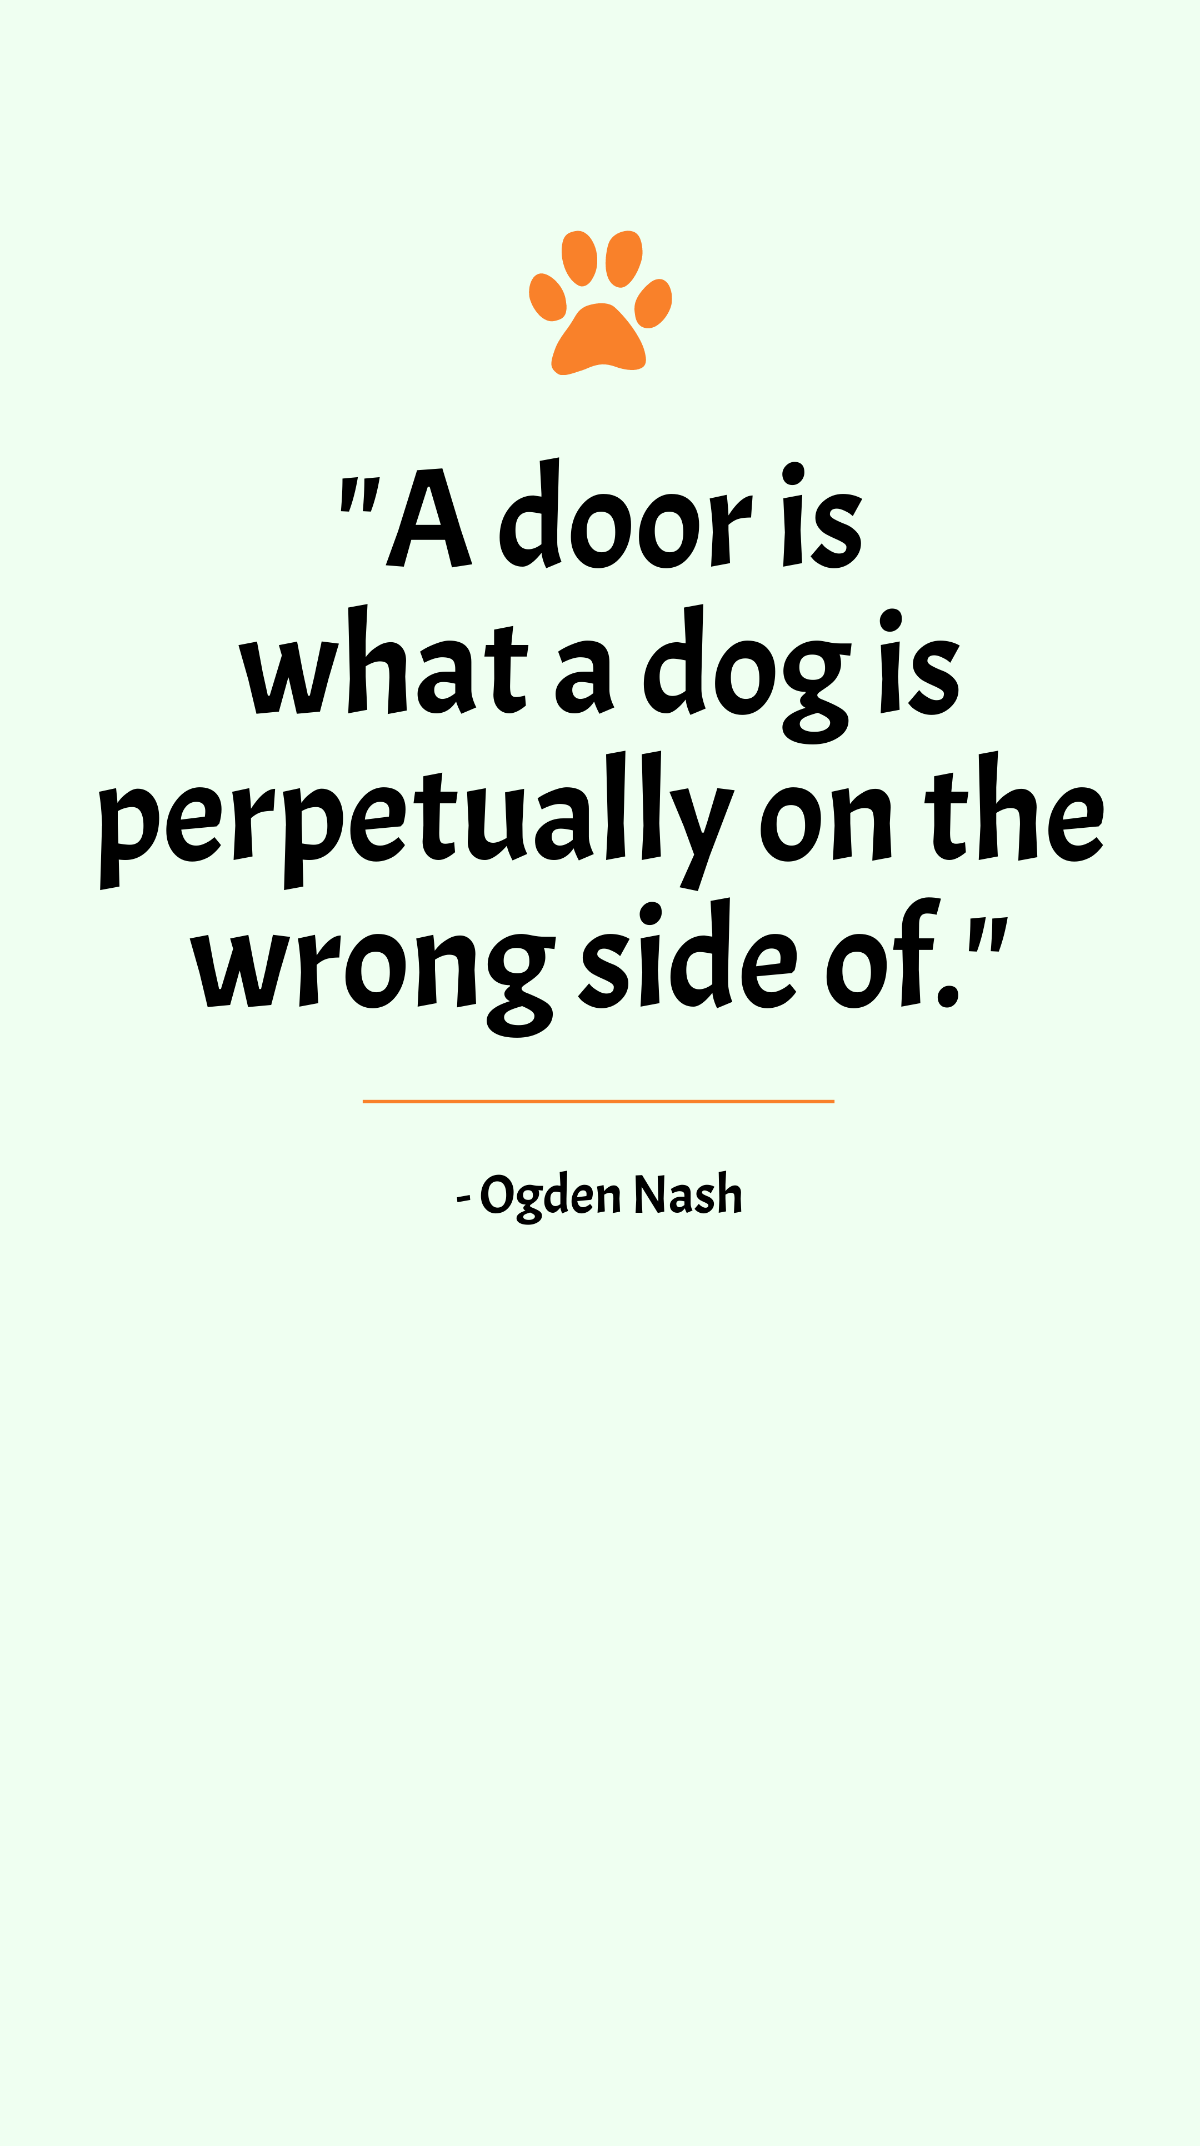 Ogden Nash - A door is what a dog is perpetually on the wrong side of.